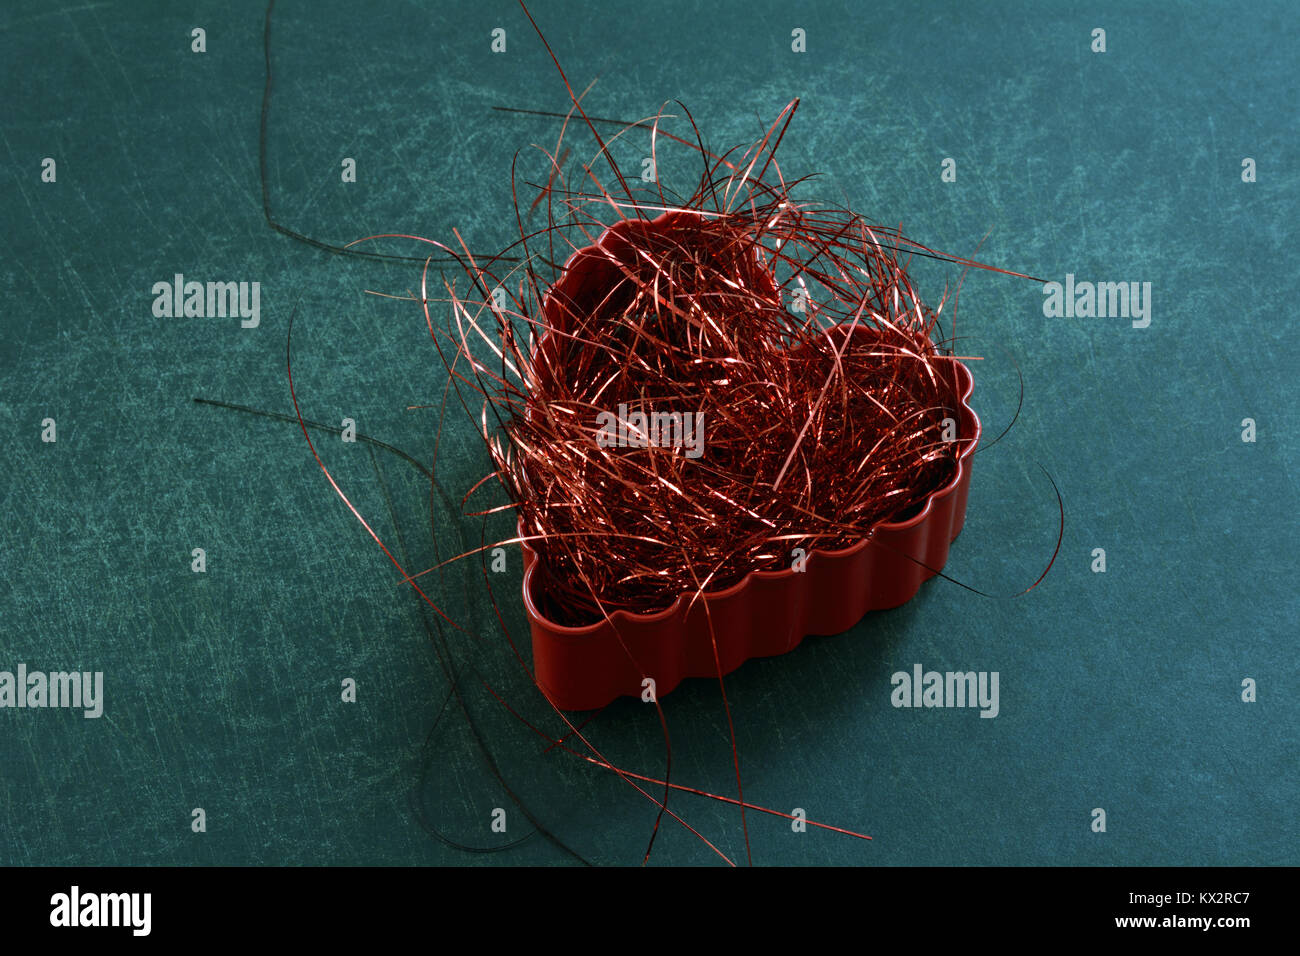 Anti-valentine concept of shredded red heart for divorce, separation or other break up Stock Photo